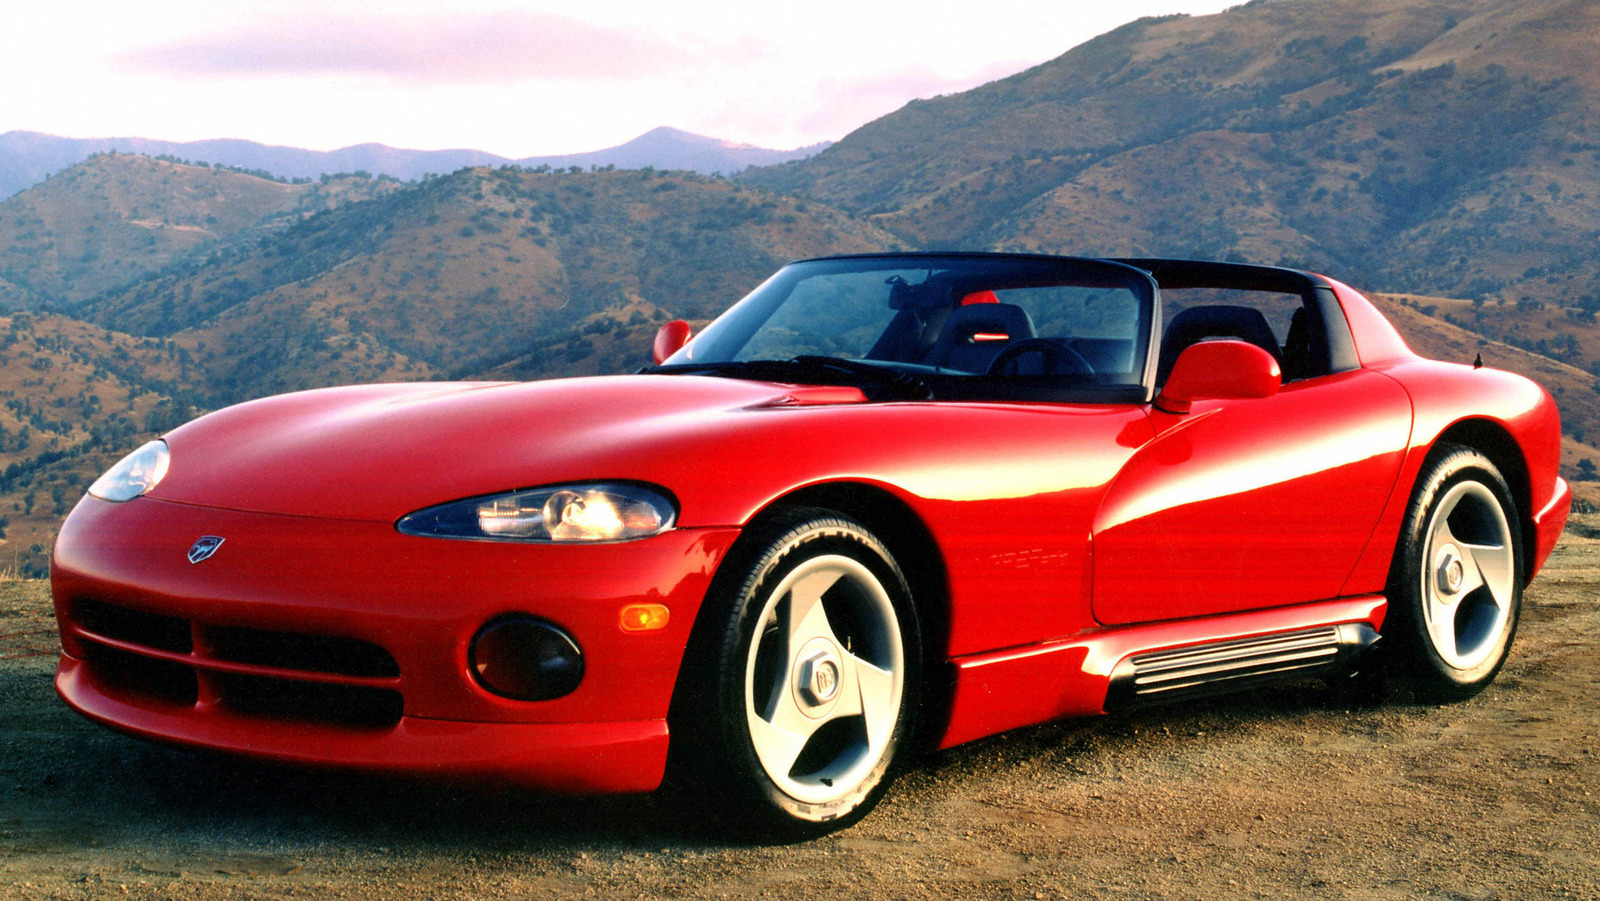 The First Dodge Viper Was So Wild It’s Hard To Believe They Built It – SlashGear